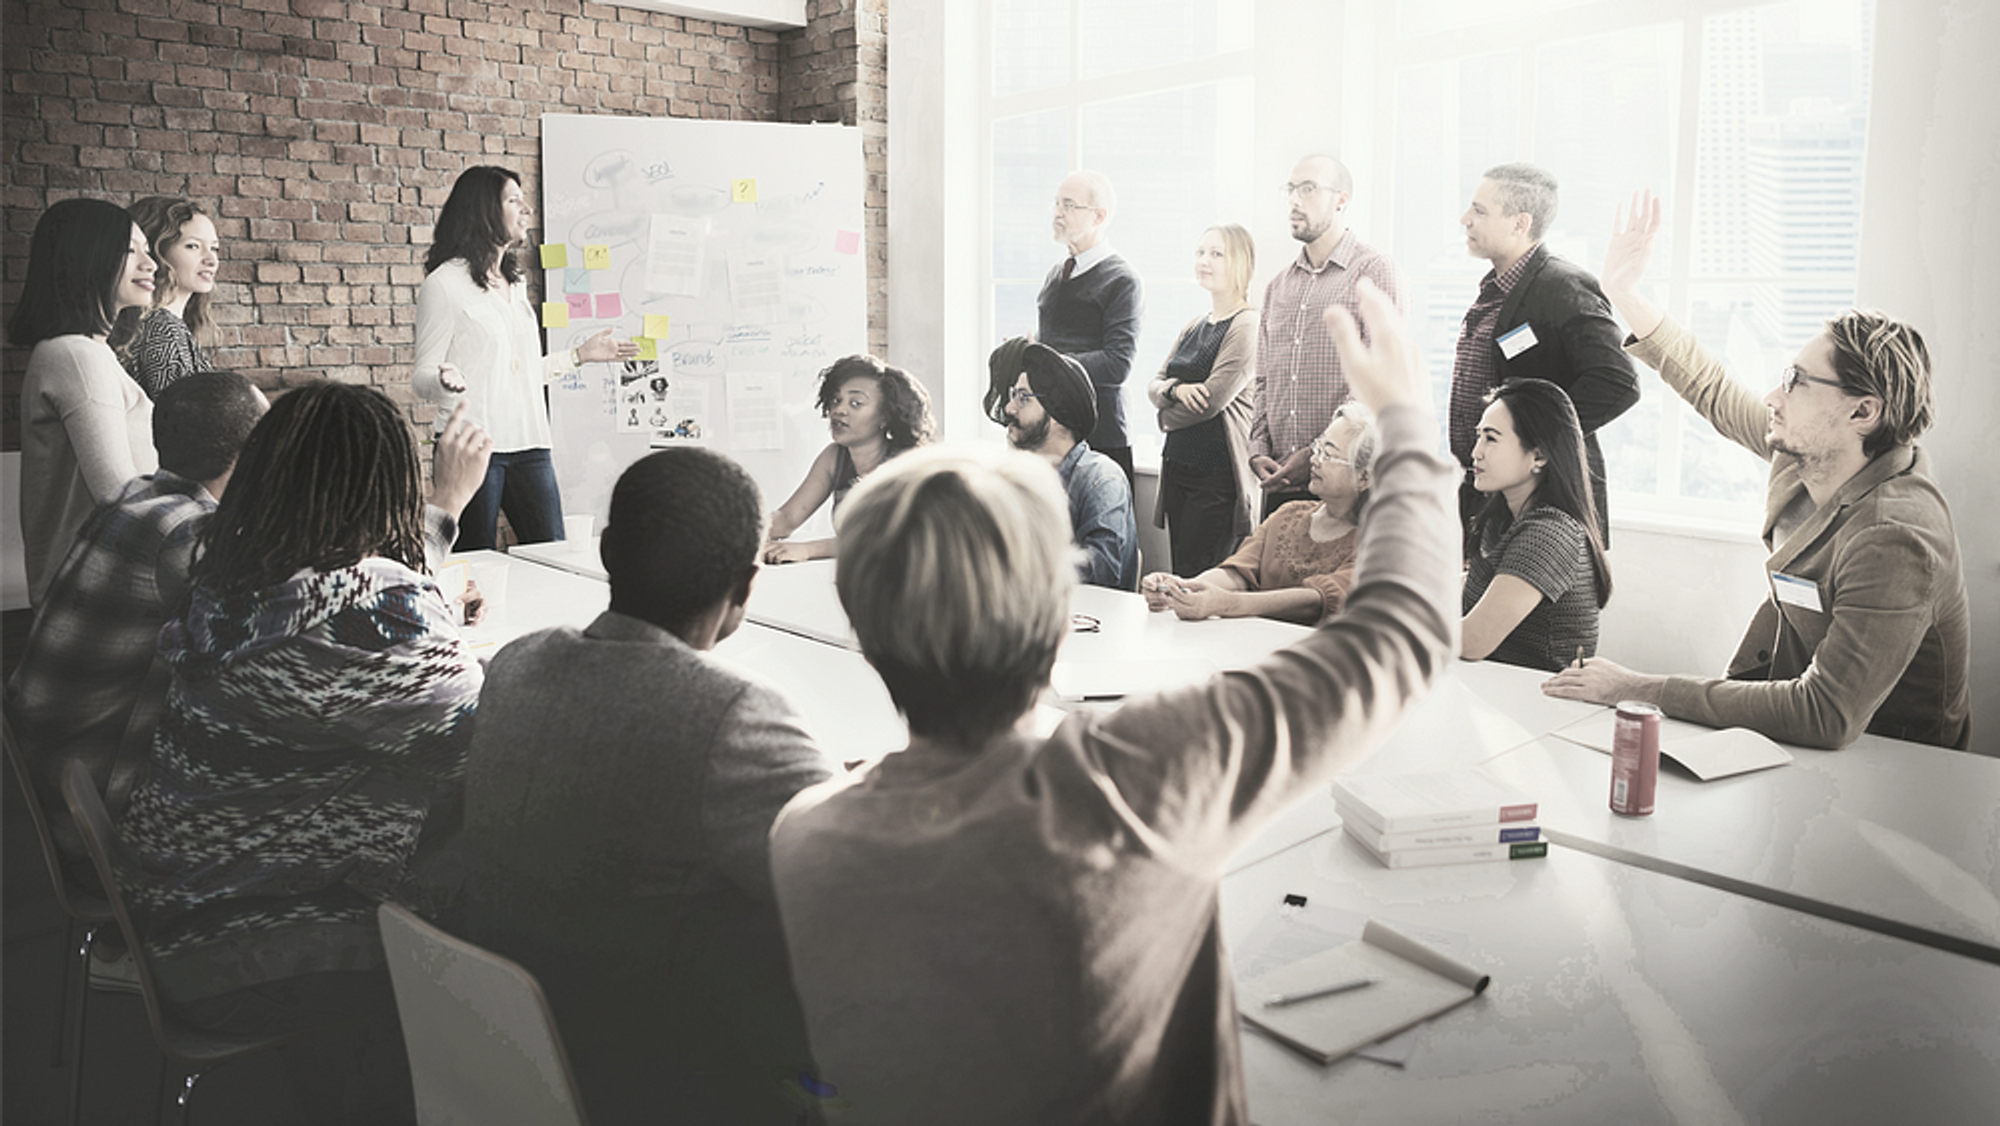 How to conduct design review meetings that don’t get derailed | by Sean Harris | UX Collective